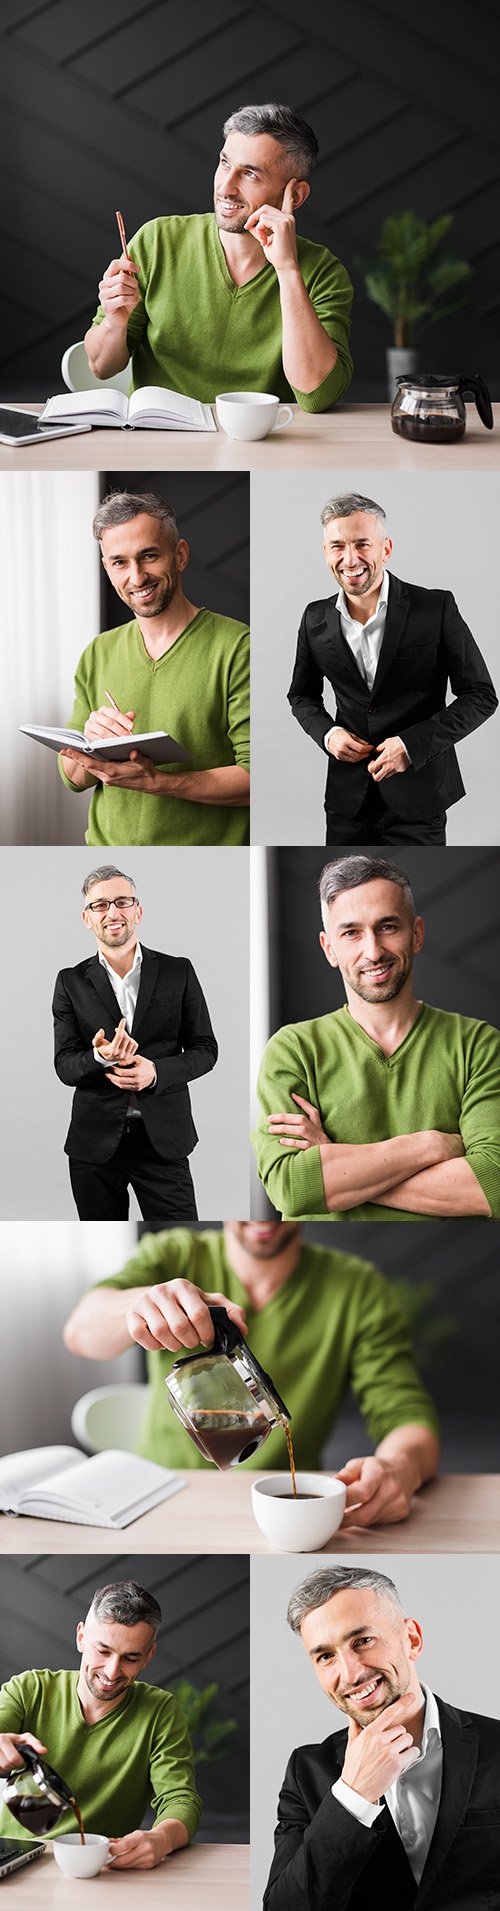 Young man in green shirt in workplace office